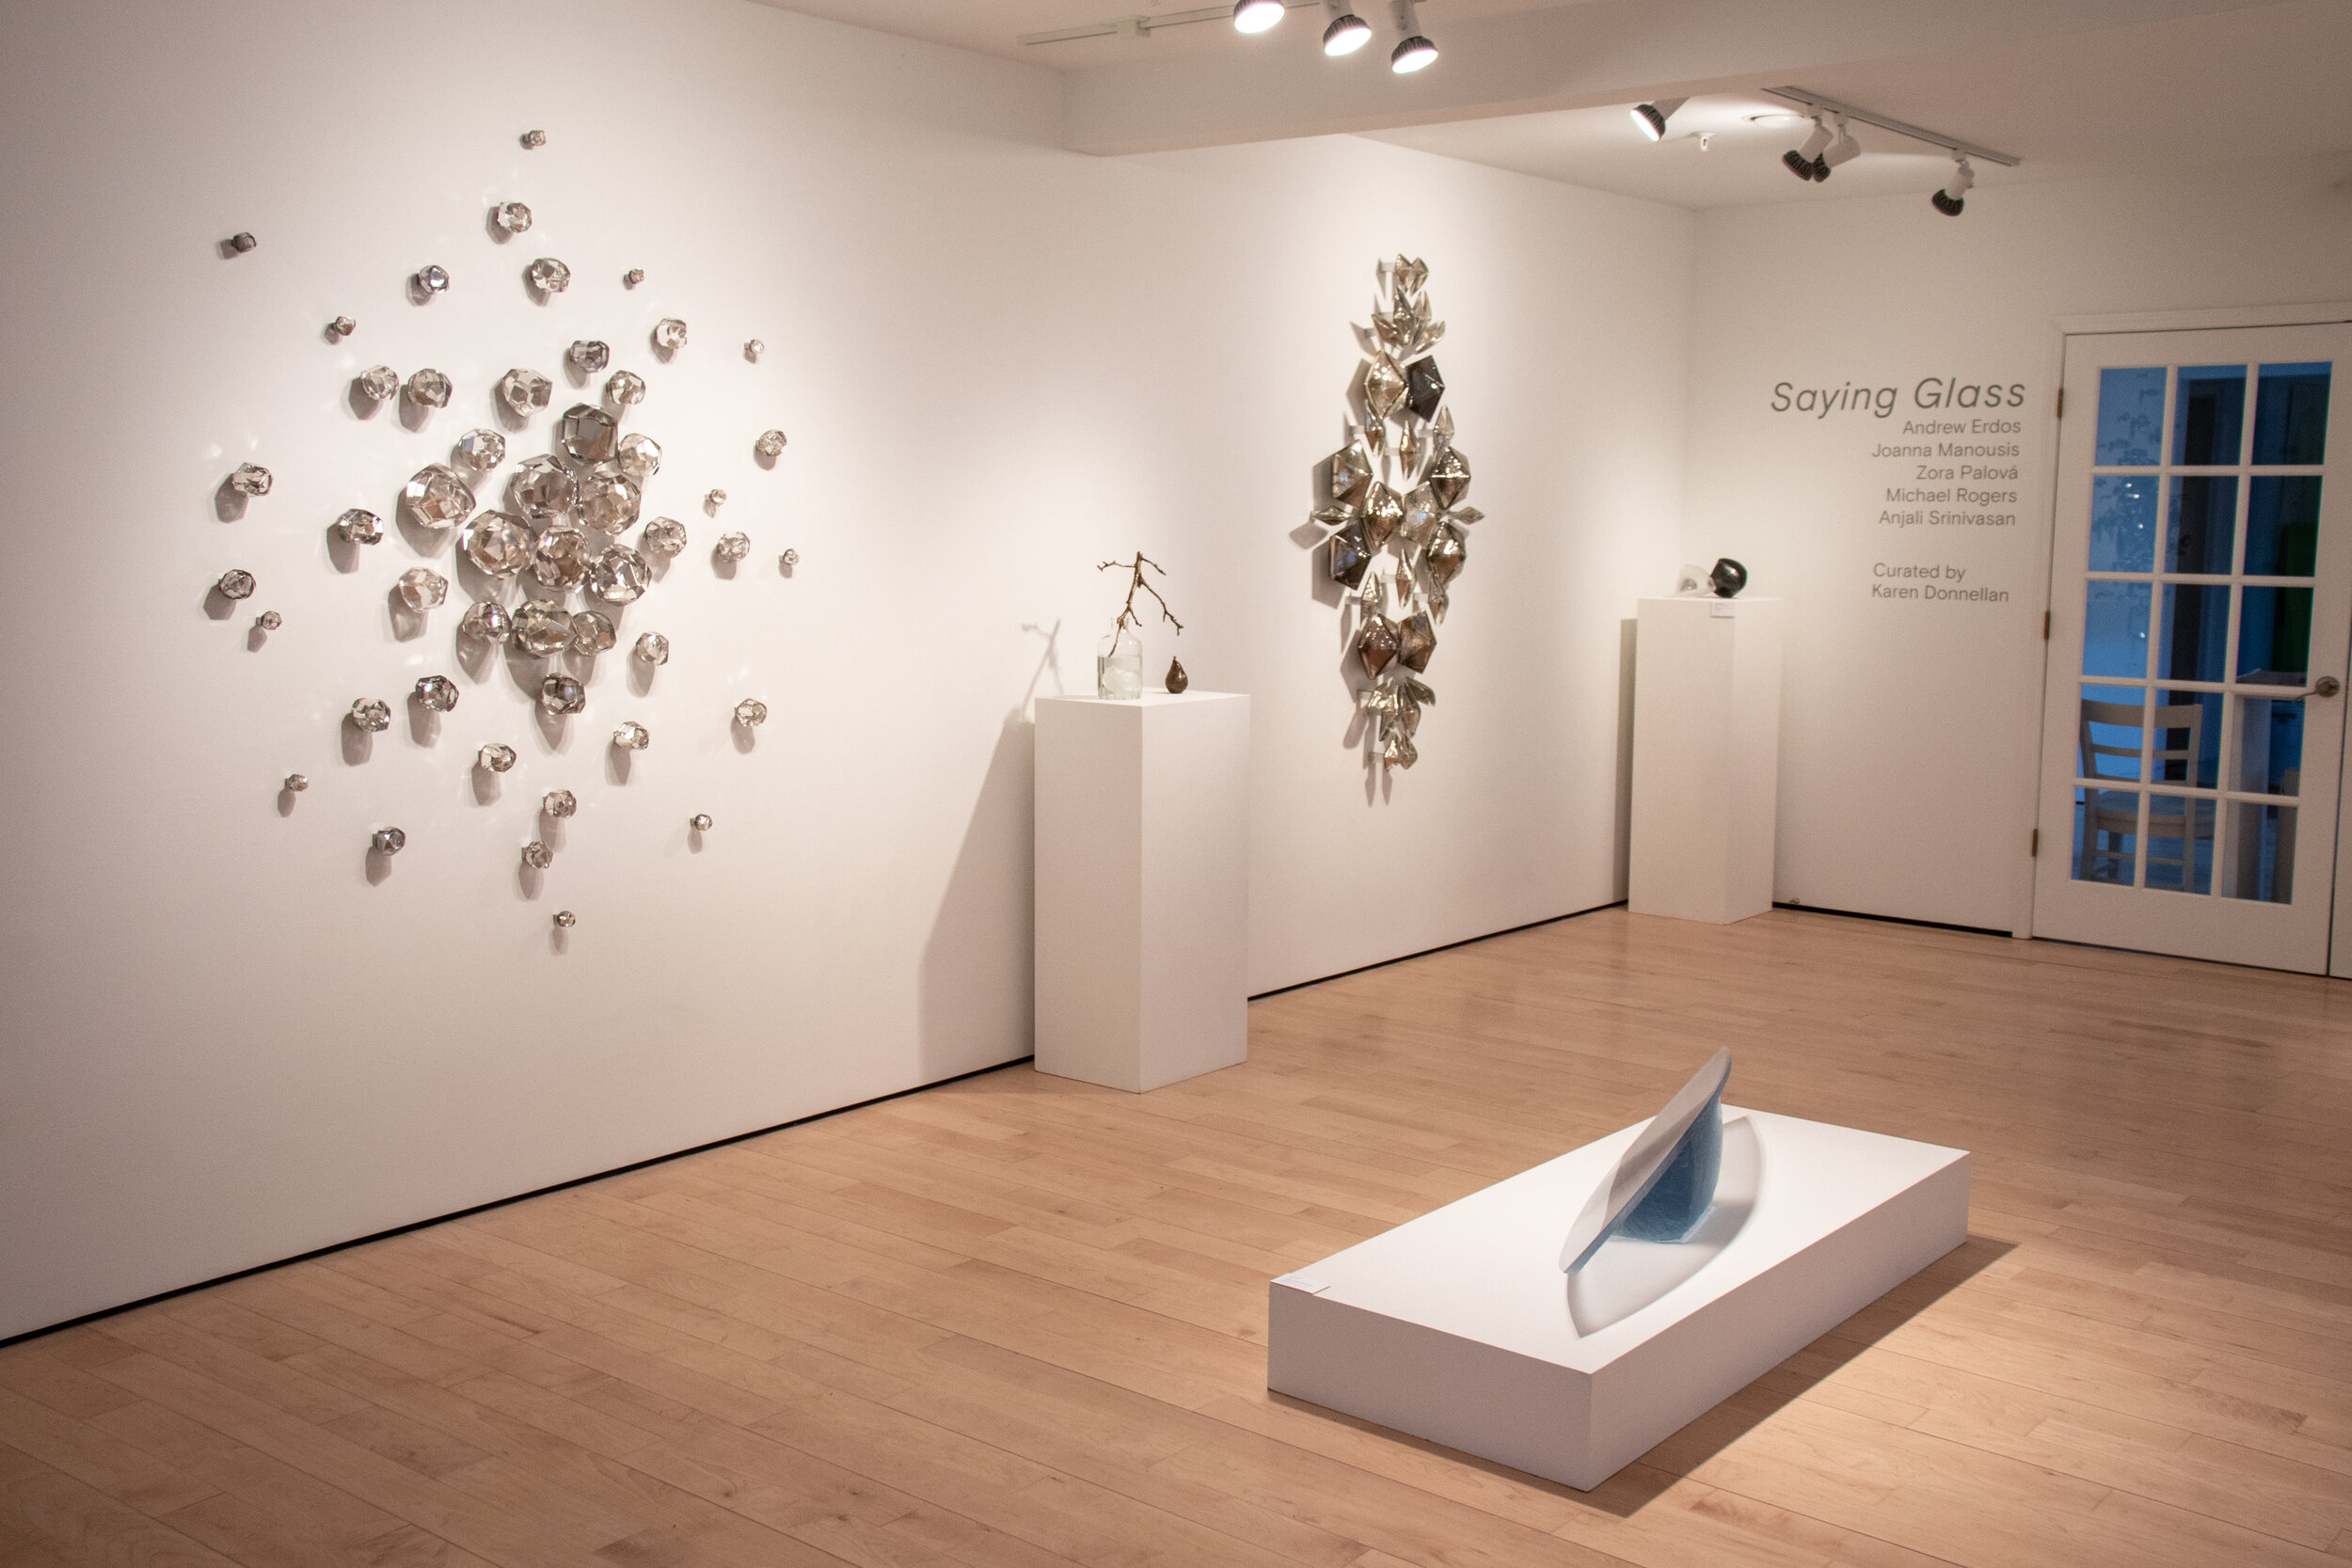  Saying Glass brings together five artists with diverse practices in glass casting and kiln forming. Their works span in form from the gestural and experimental, to the meticulously crafted, and engineered. This exhibition reflects the far-reaching e